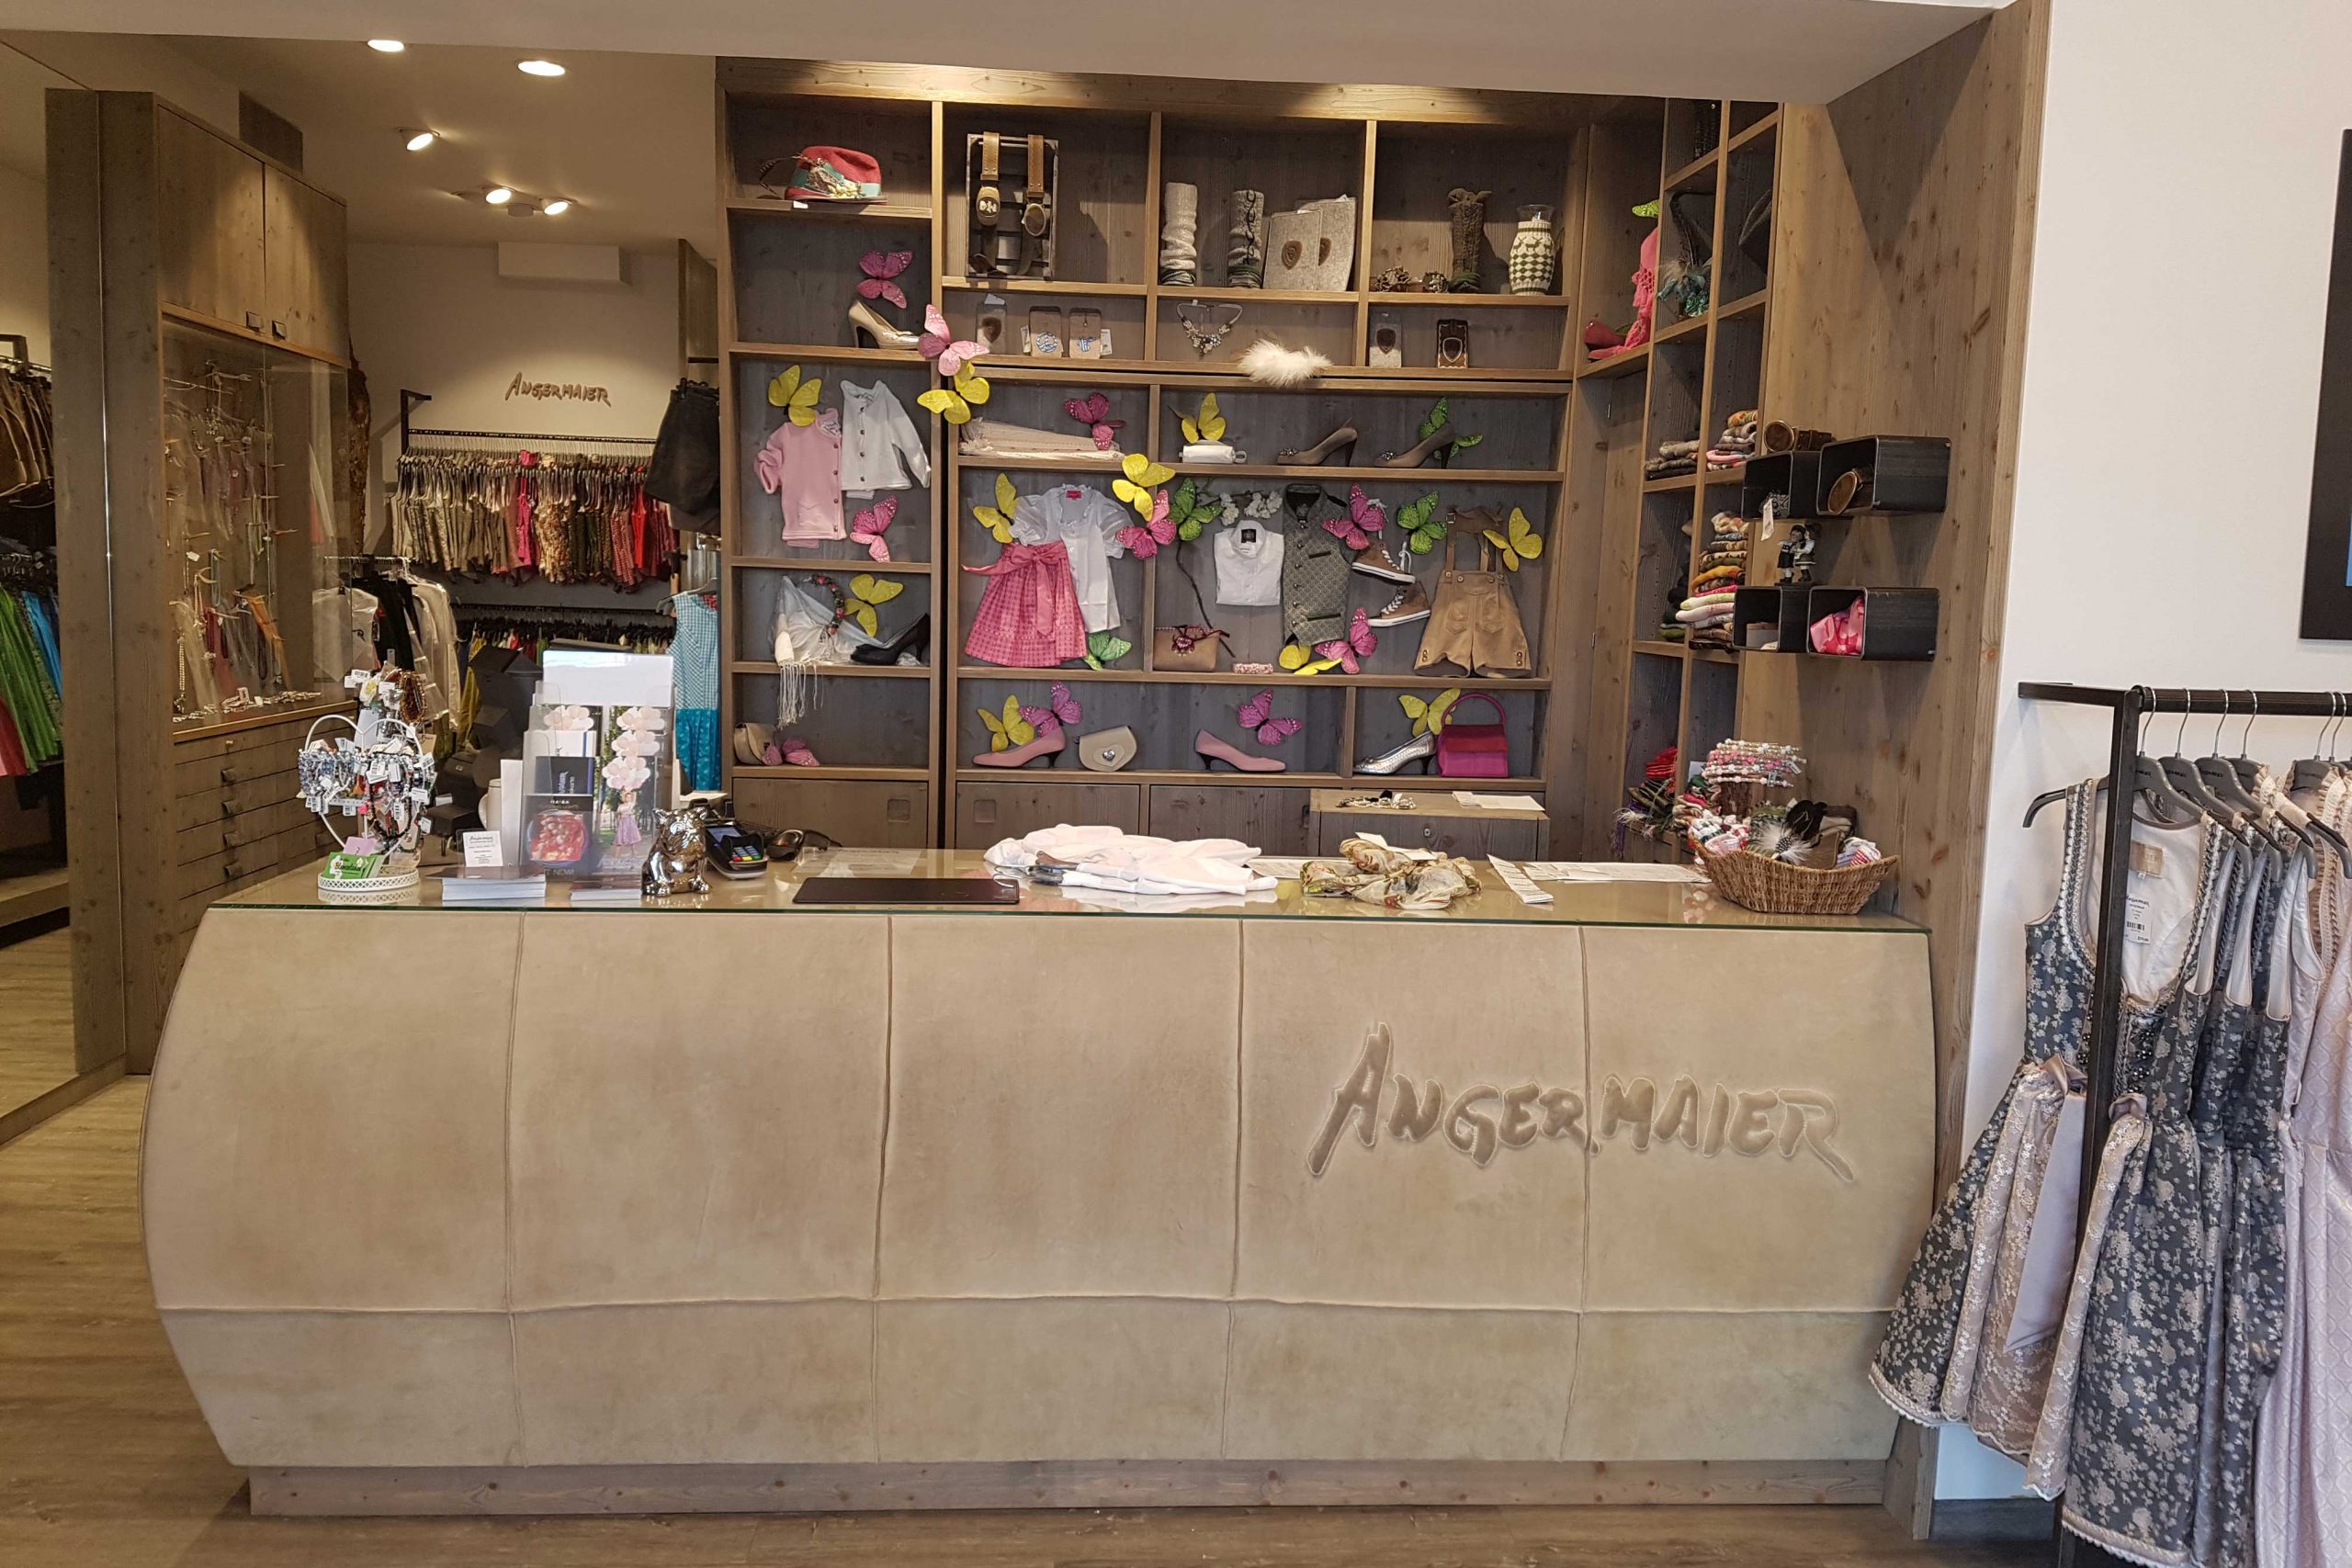 angermaier_store